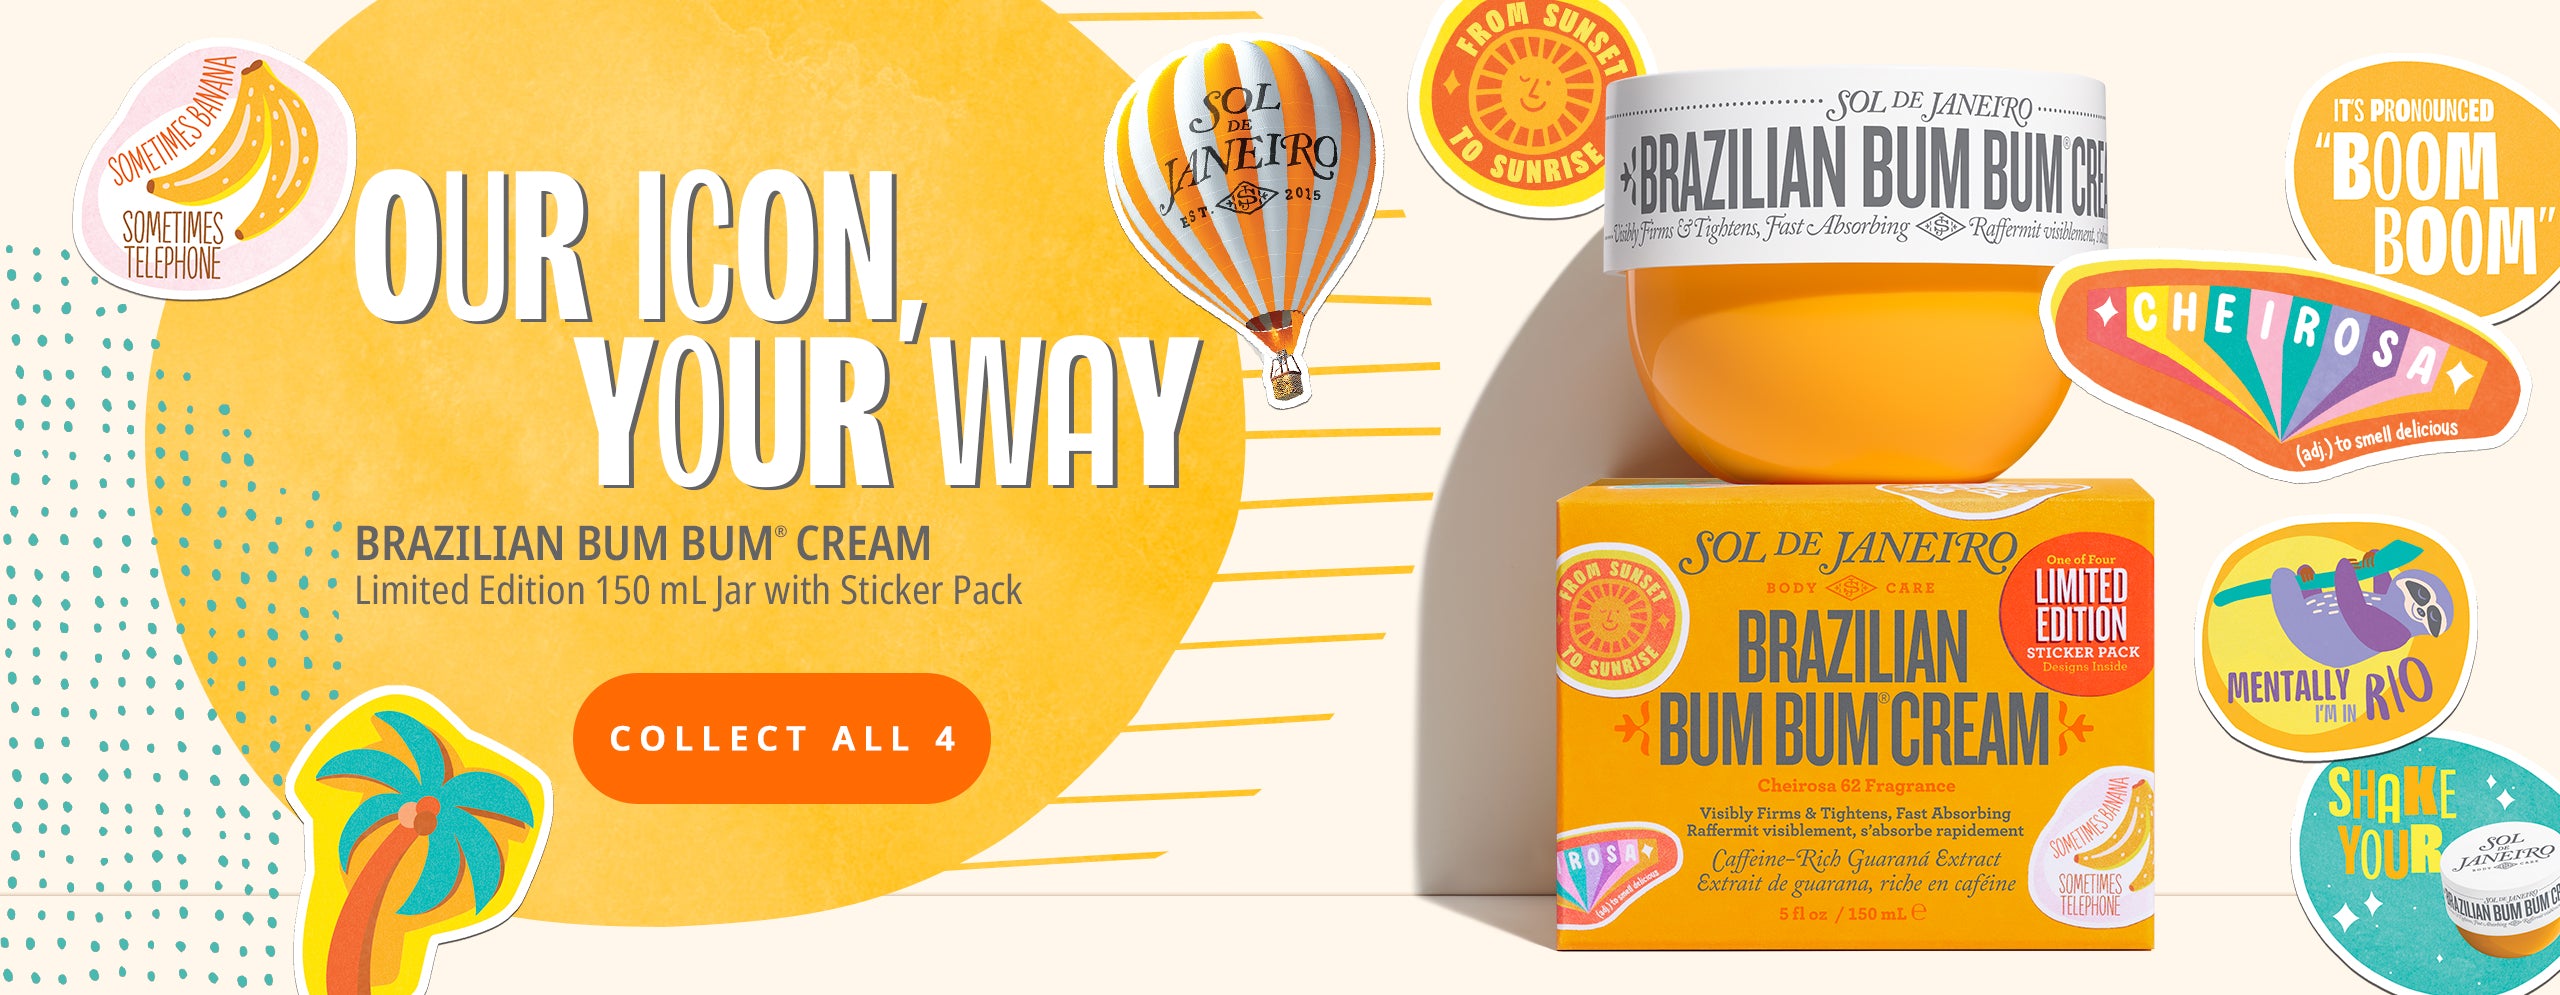 Our icon, your way - Brazilian Bum Bum Cream Limited Edition 150ml Jar with Sticker Pack. Collect all 4!